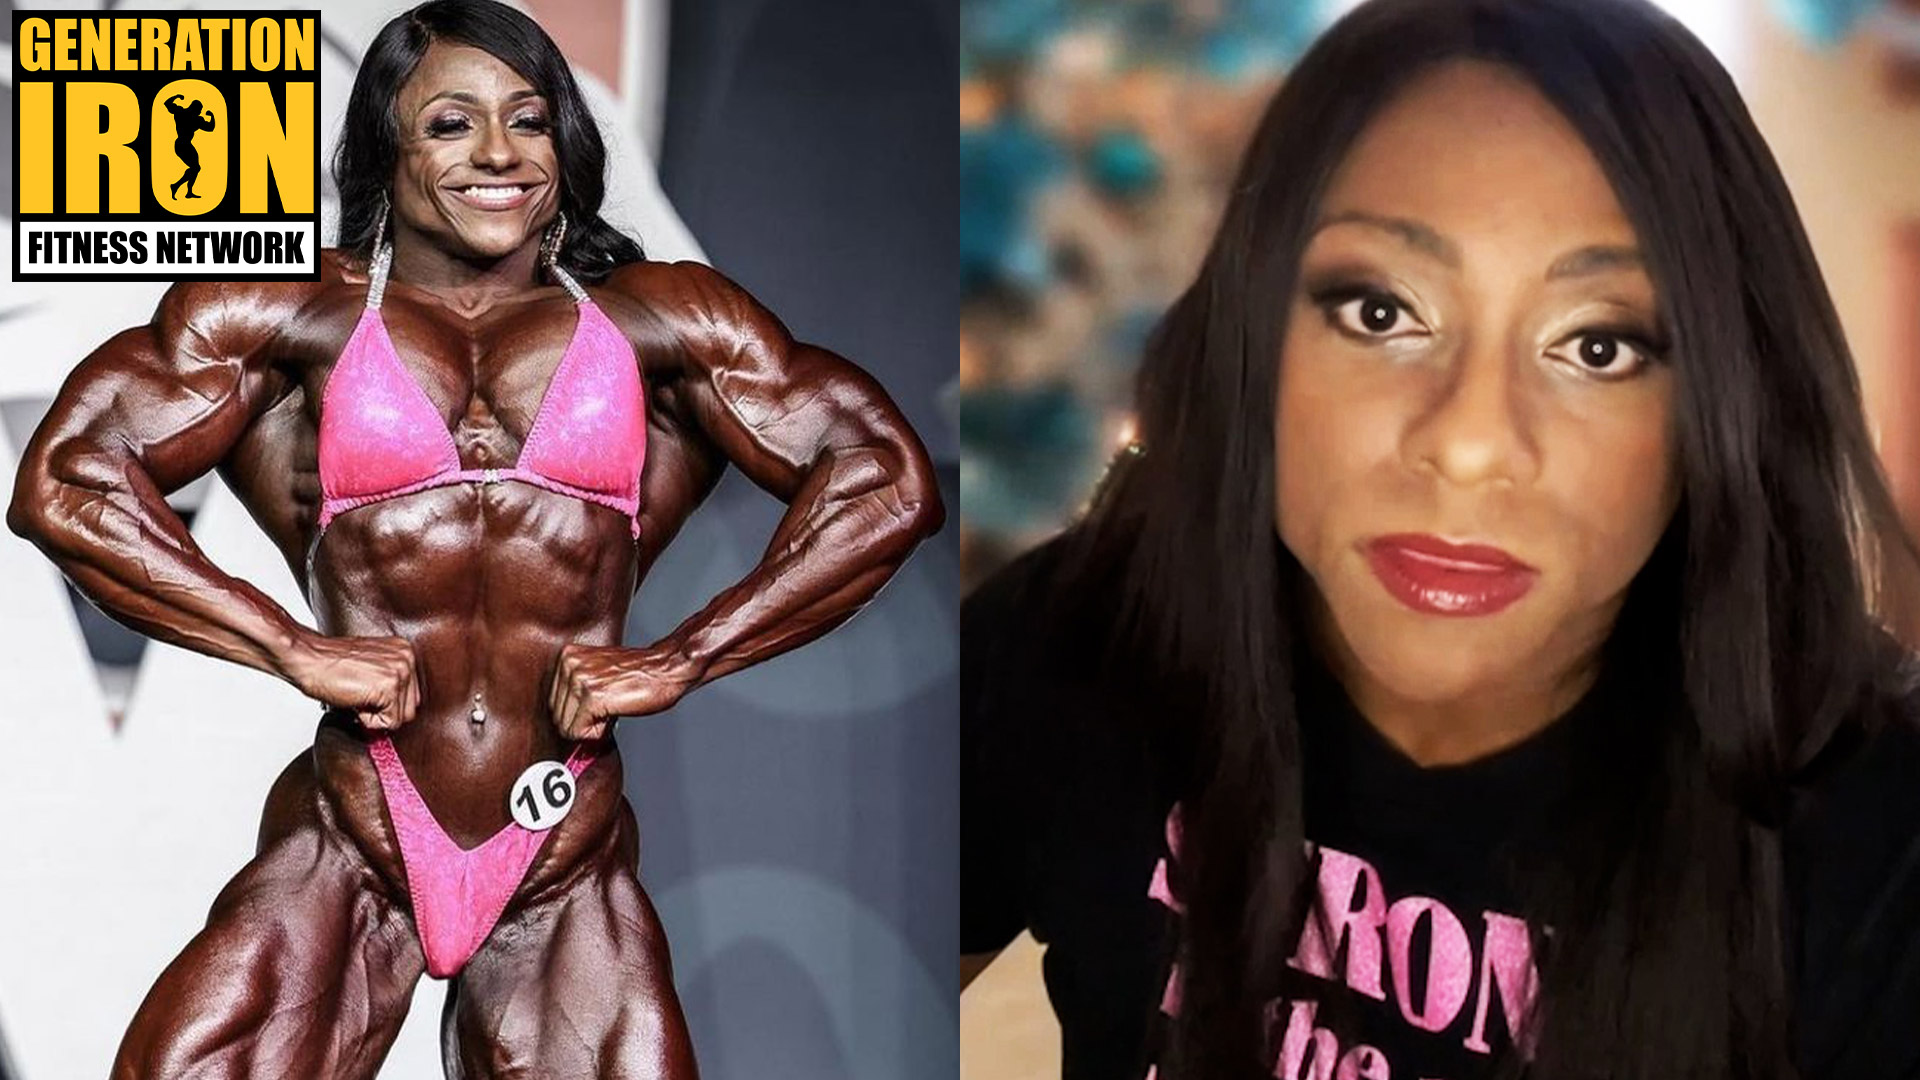 Andrea Shaw On Women’s Bodybuilding Criticism: “Without It There Are No Other Female Divisions”